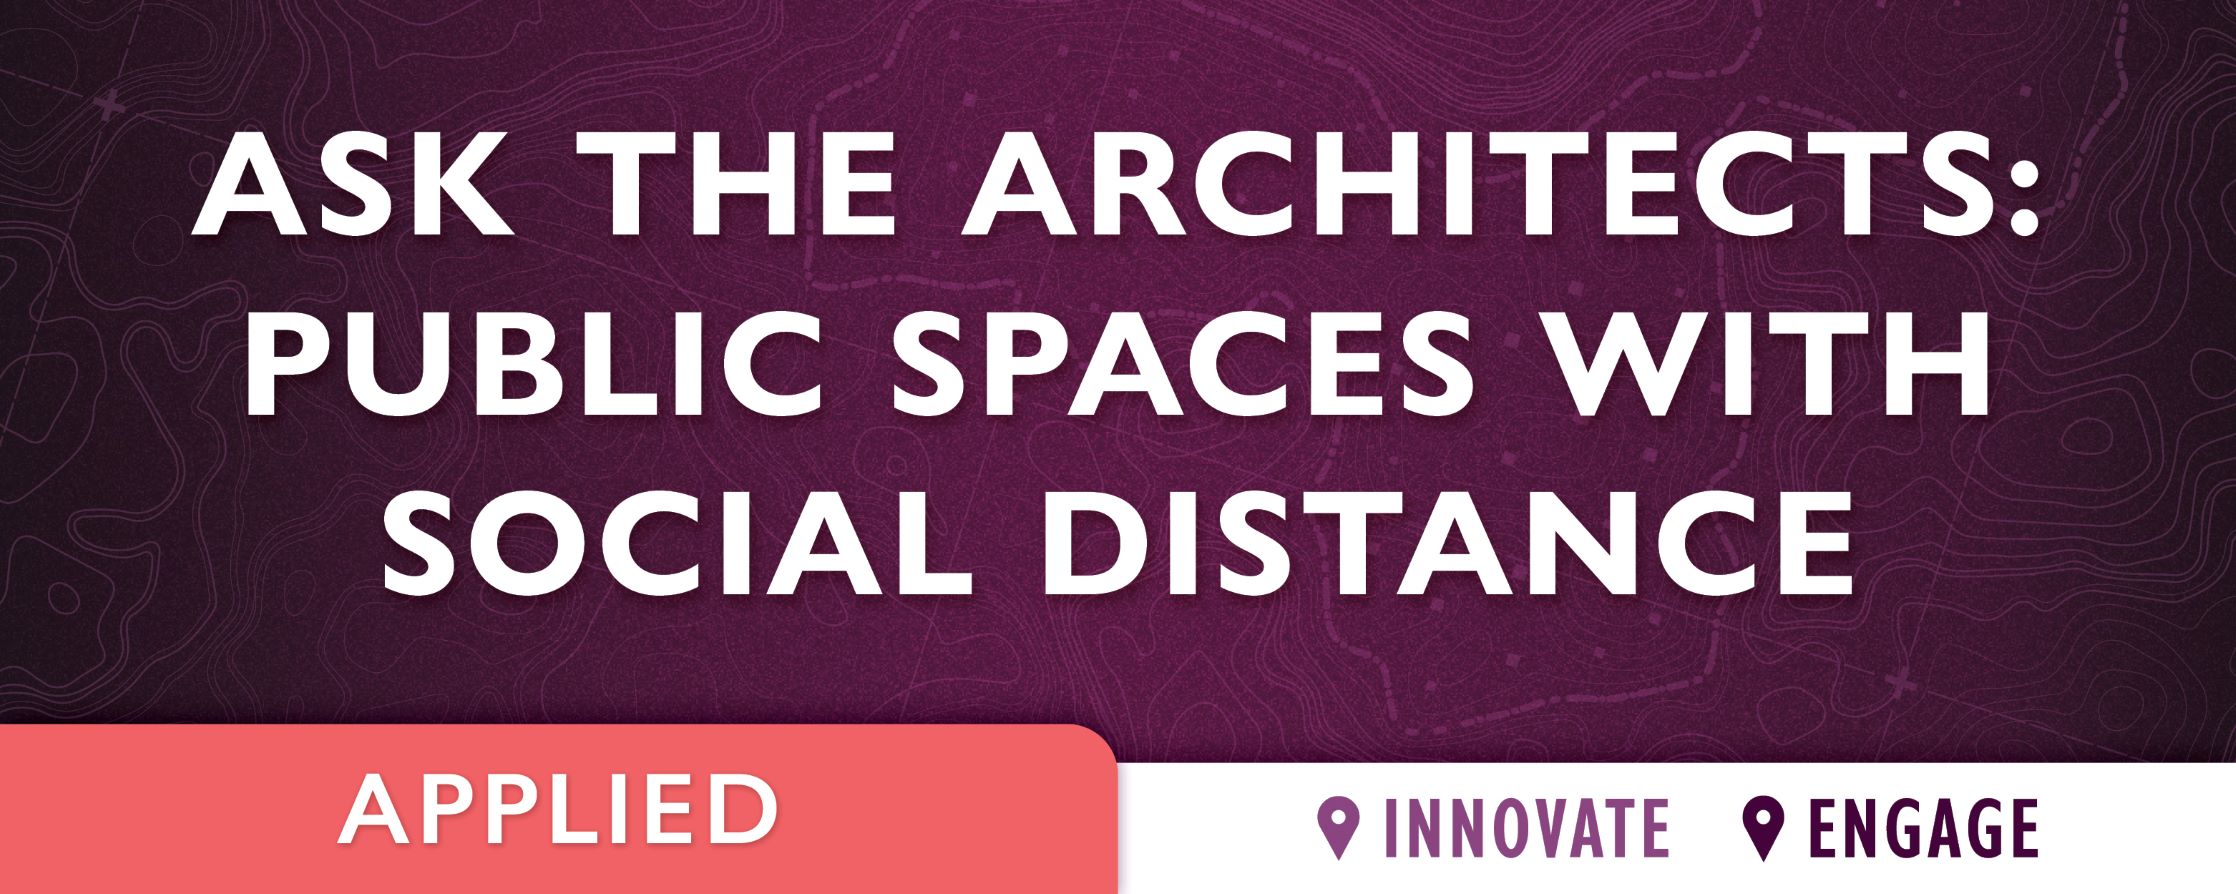 purple background with text: Ask the Architects: Public Spaces with Social Distance